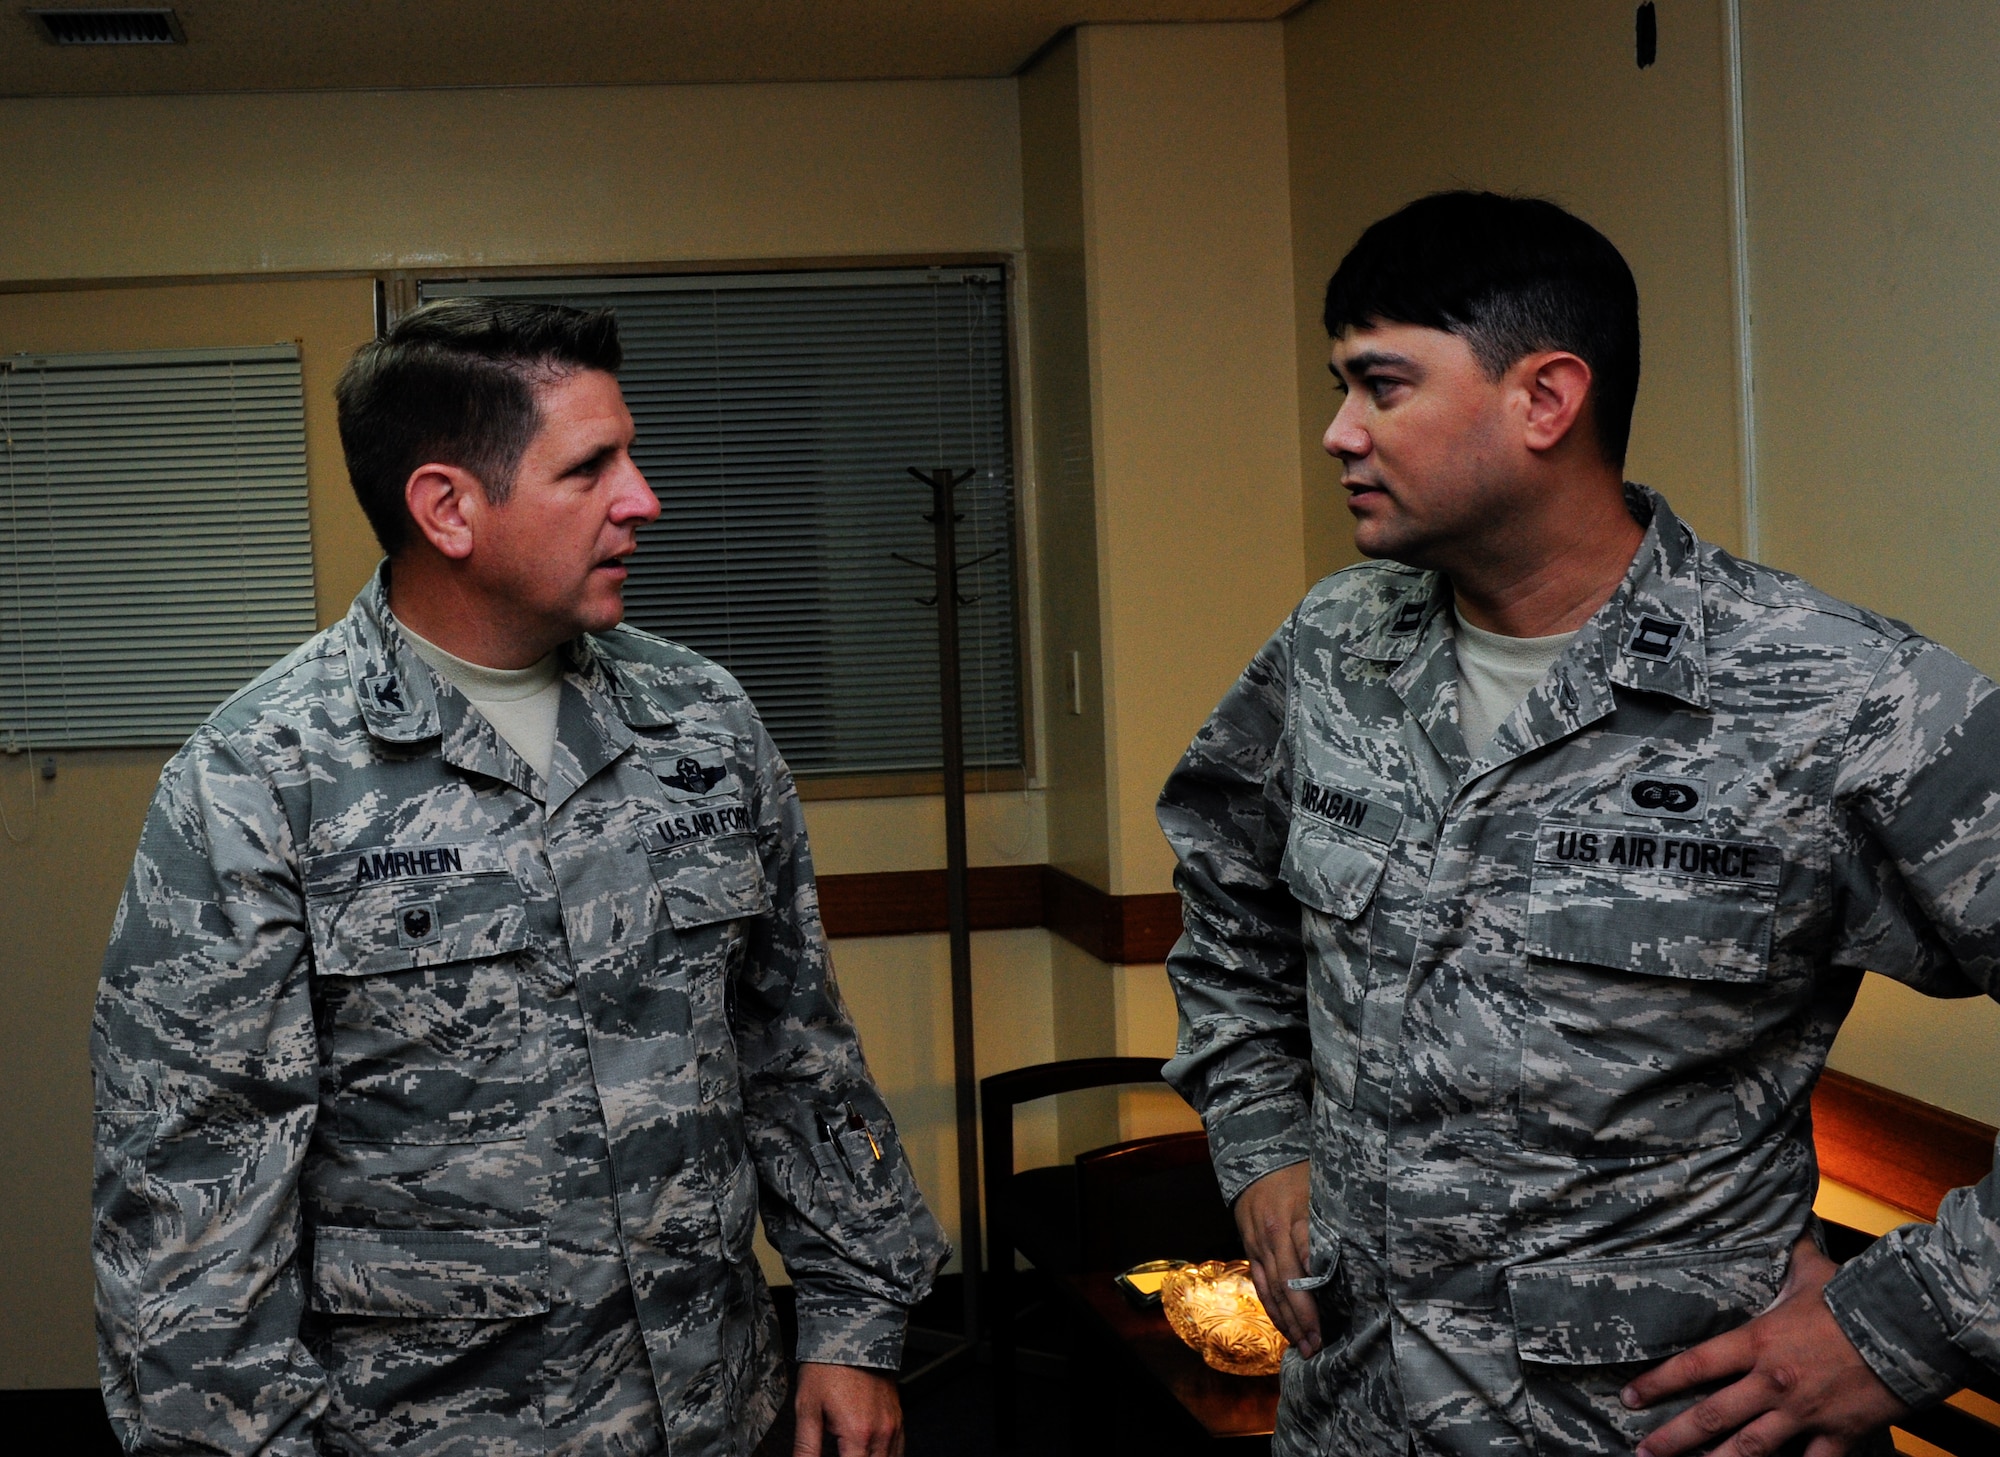 Capt. Joshua Caragan, 18th Wing equal opportunity officer, talks to Col. Christopher Amrhein, 18th Wing vice commander, about the resources provided by the equal opportunity office in support of Project 22 Sept. 14, 2015 at Kadena Air Base, Japan. Project 22 is a suicide prevention initiative challenging Airmen to find out what resources are available to them around the base. (U.S. Air Force photo by Airman 1st Class Corey M. Pettis)    